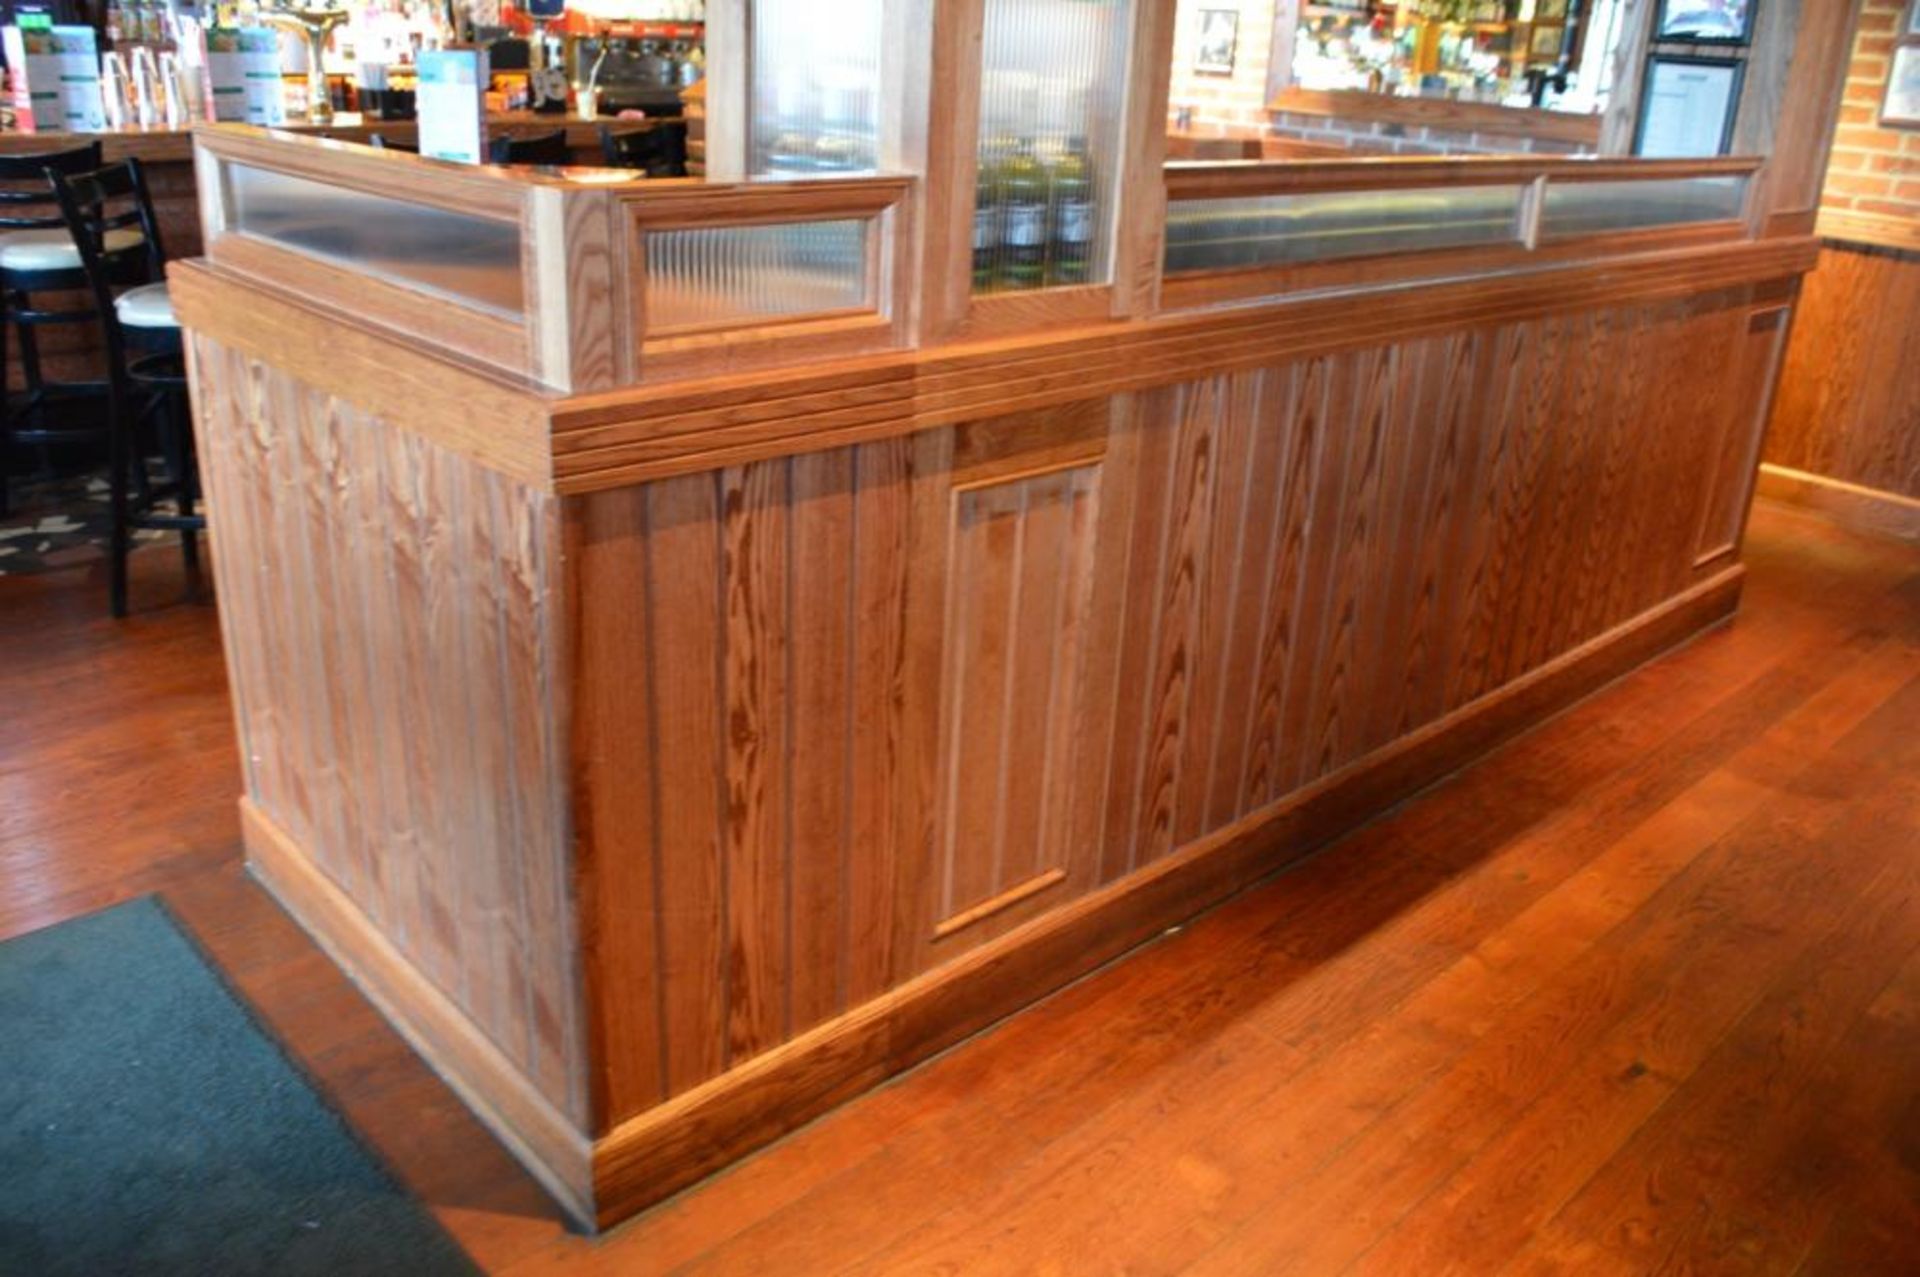 1 x Bar Restaurant Room Partition With Seating Bench, Pillar, Wine Cabinet and Foot Rest - Overall S - Image 3 of 21